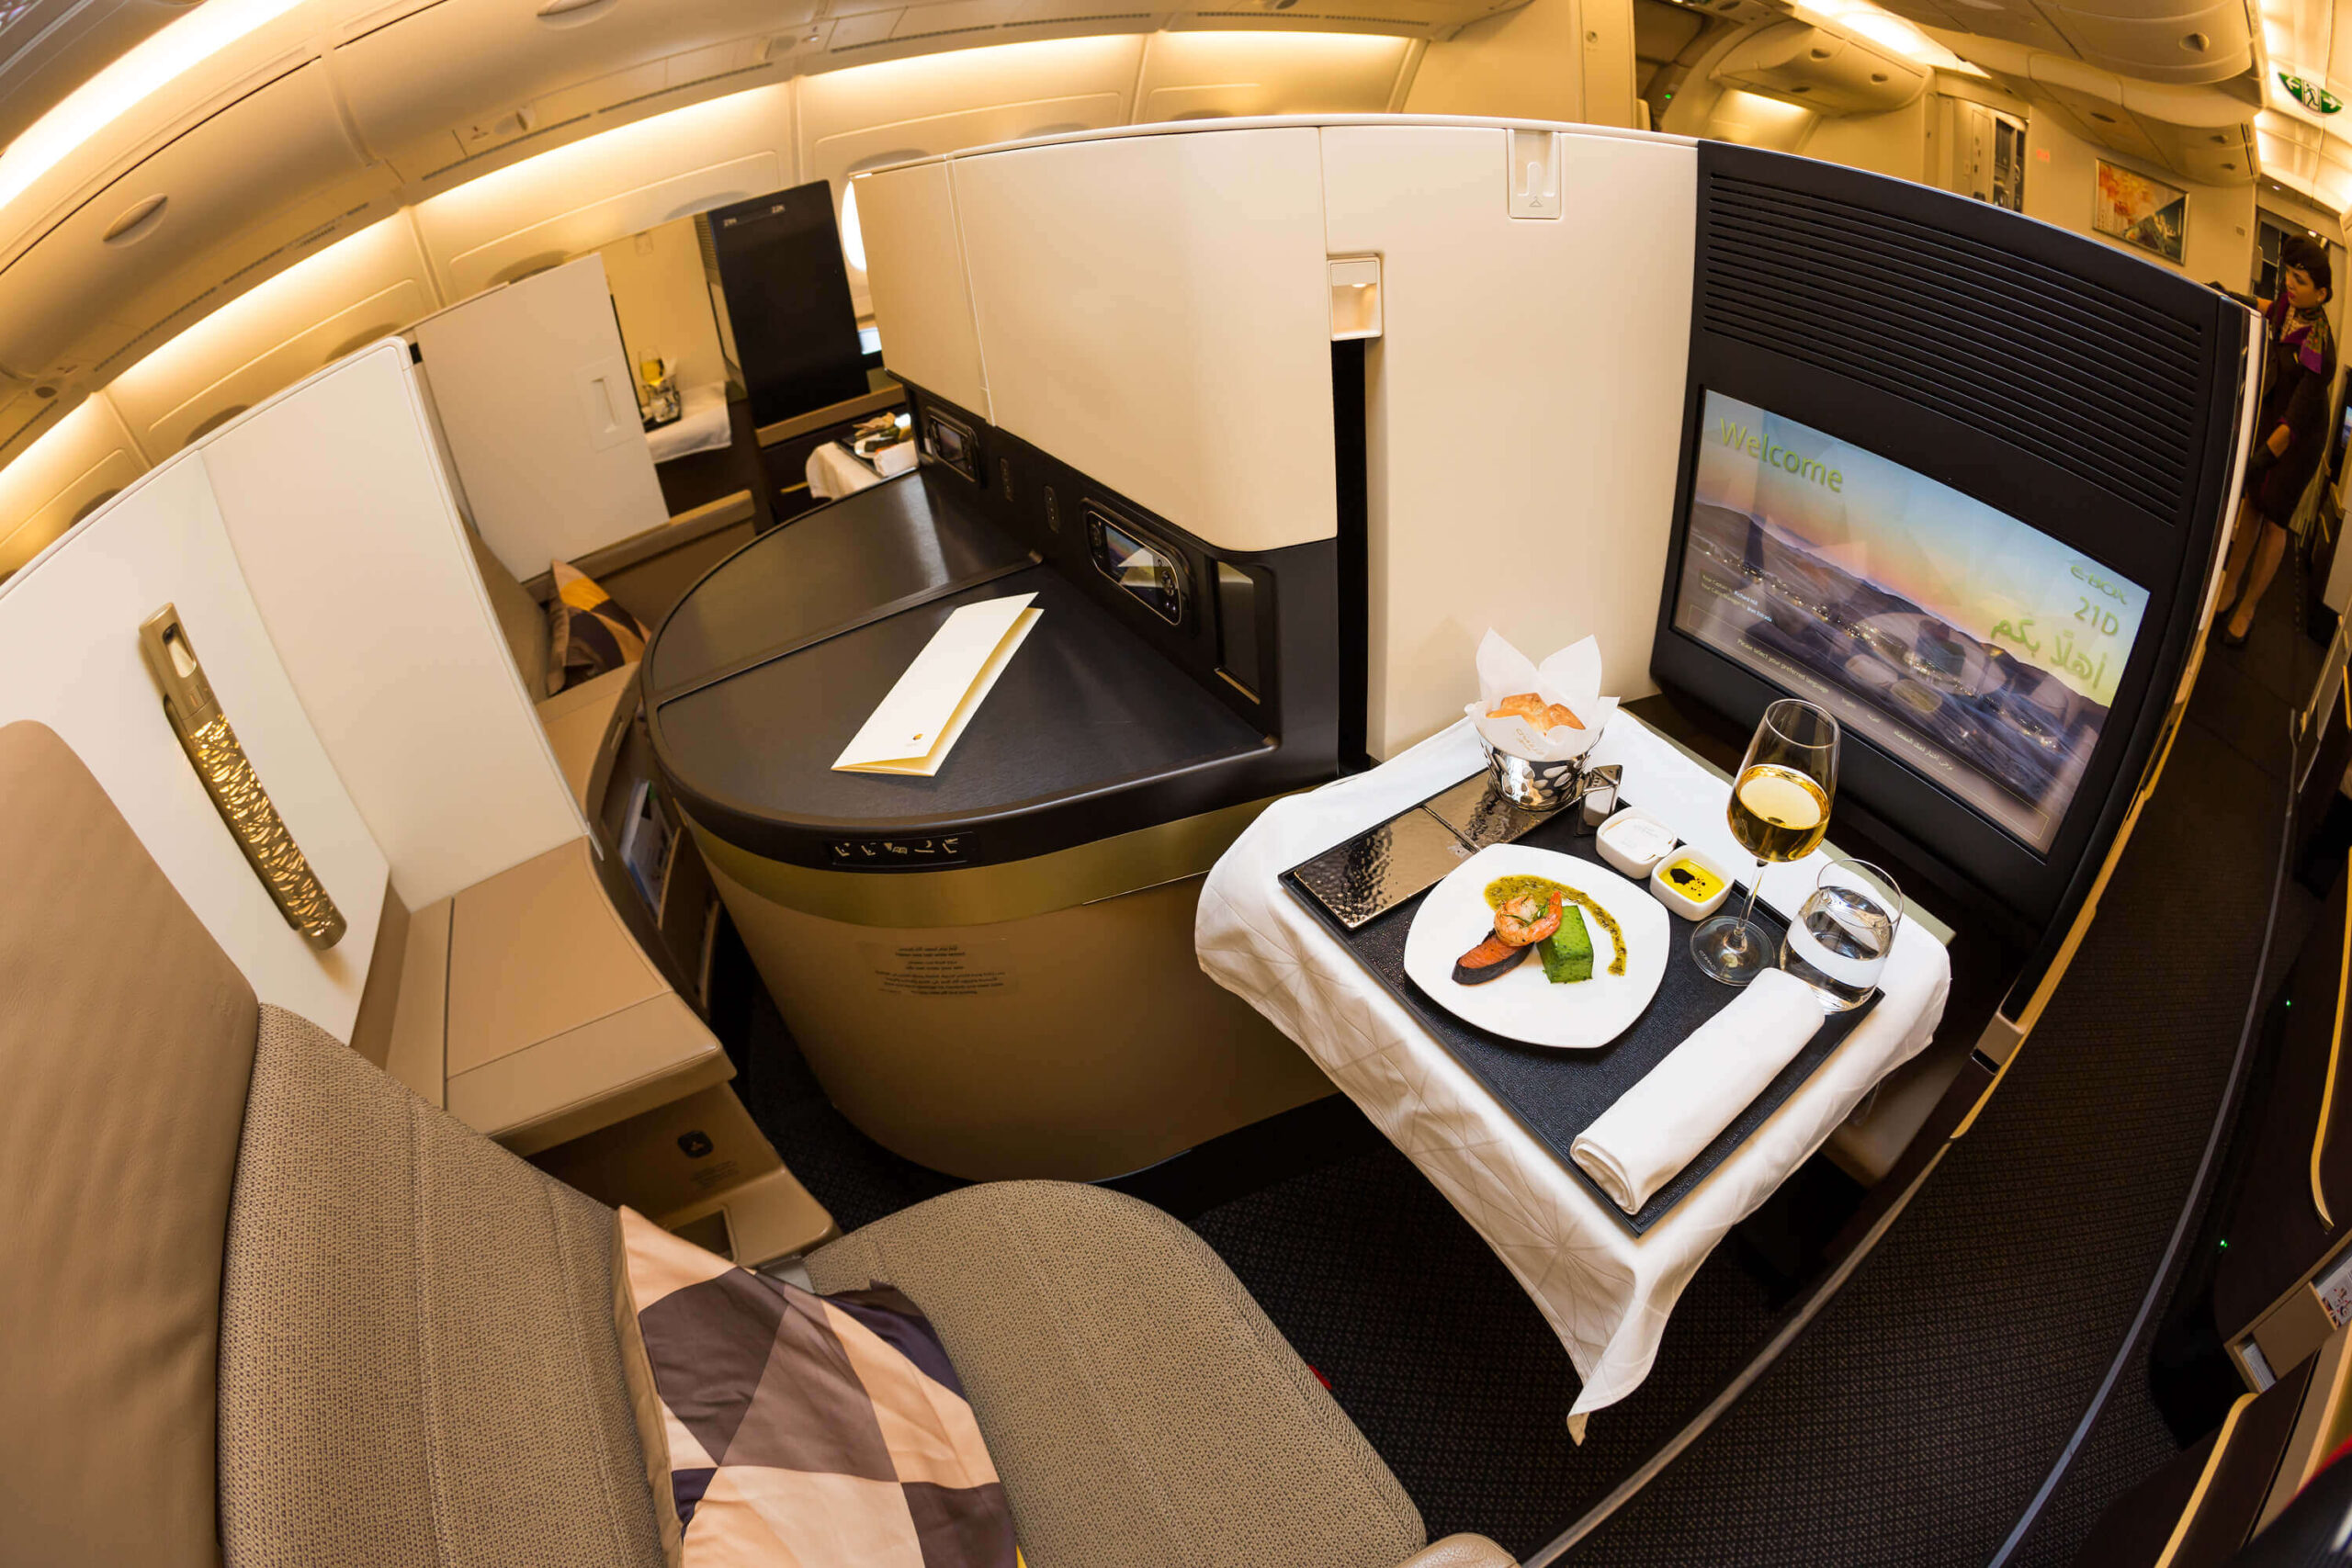 https://www.aerotime.aero/images/10_of_the_most_luxurious_business_class_cabins_in_the_world-scaled.jpg